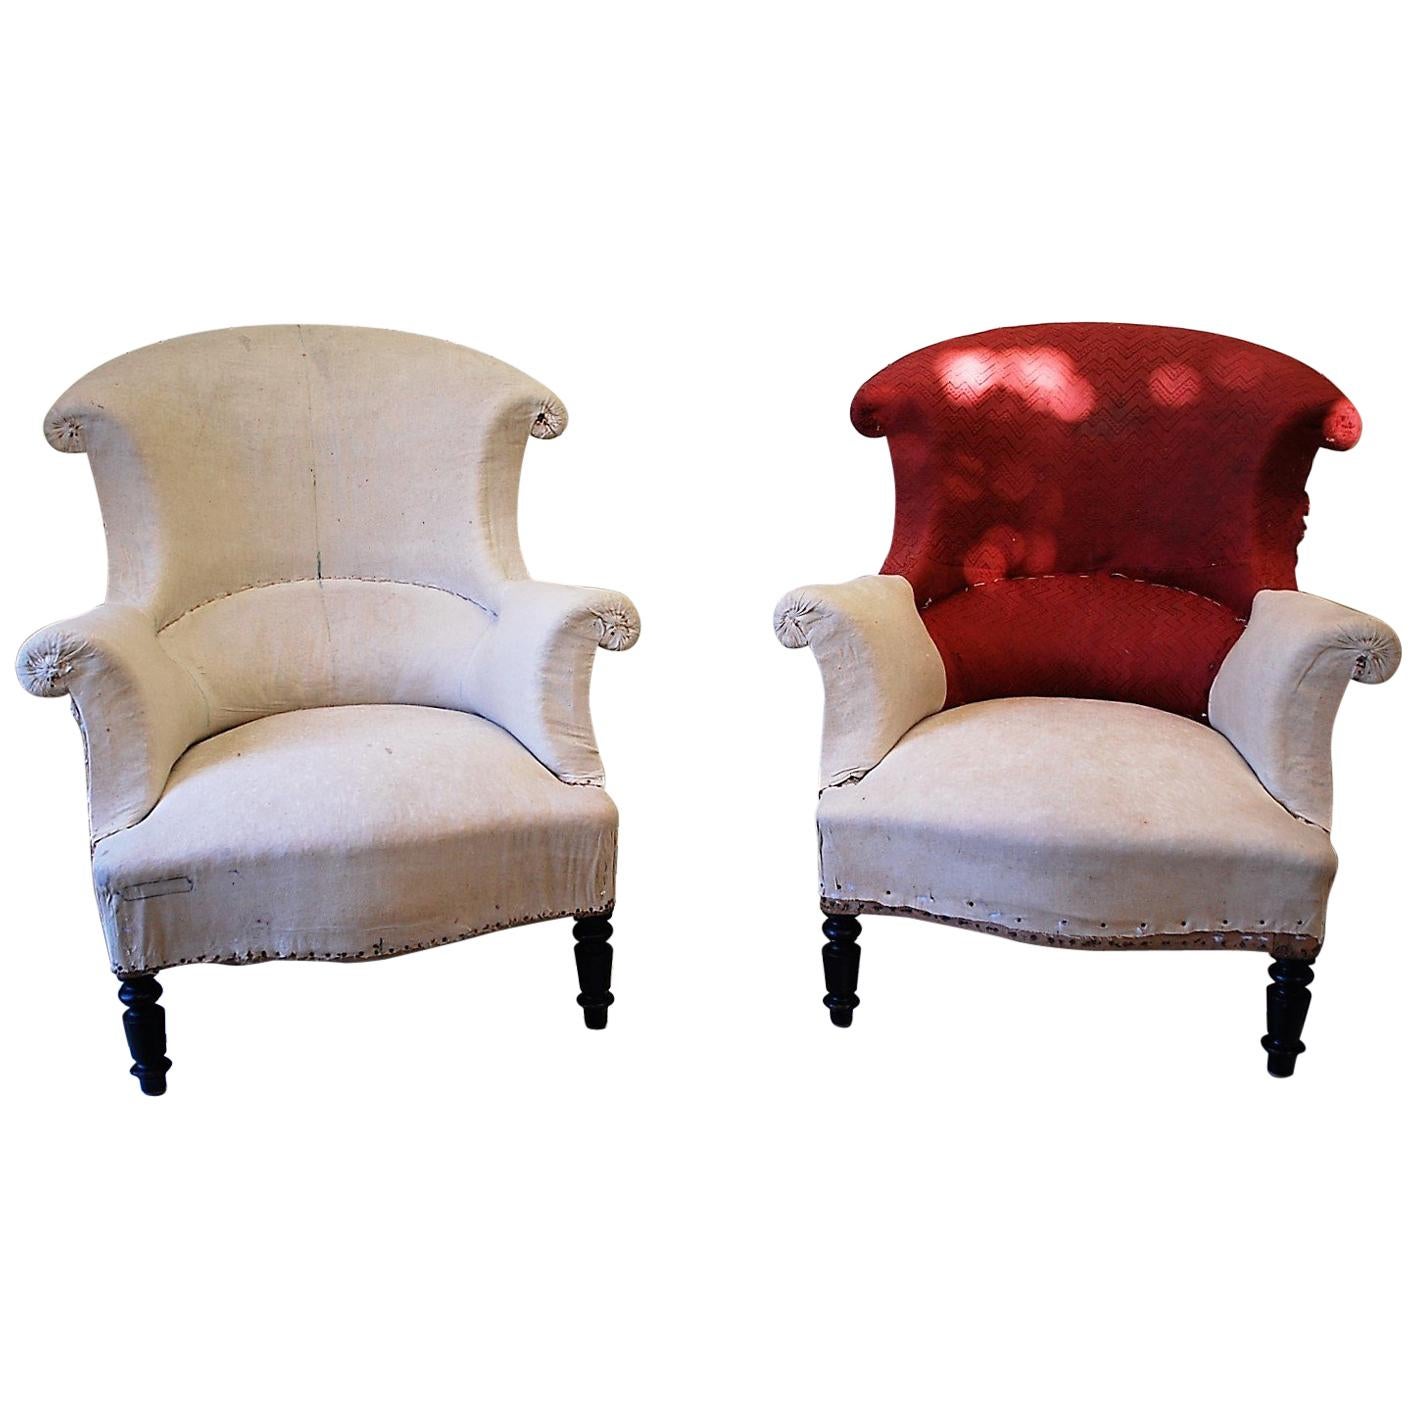 Pair of Upholstered Fauteuil Armchairs/Tub Chairs, circa 1860